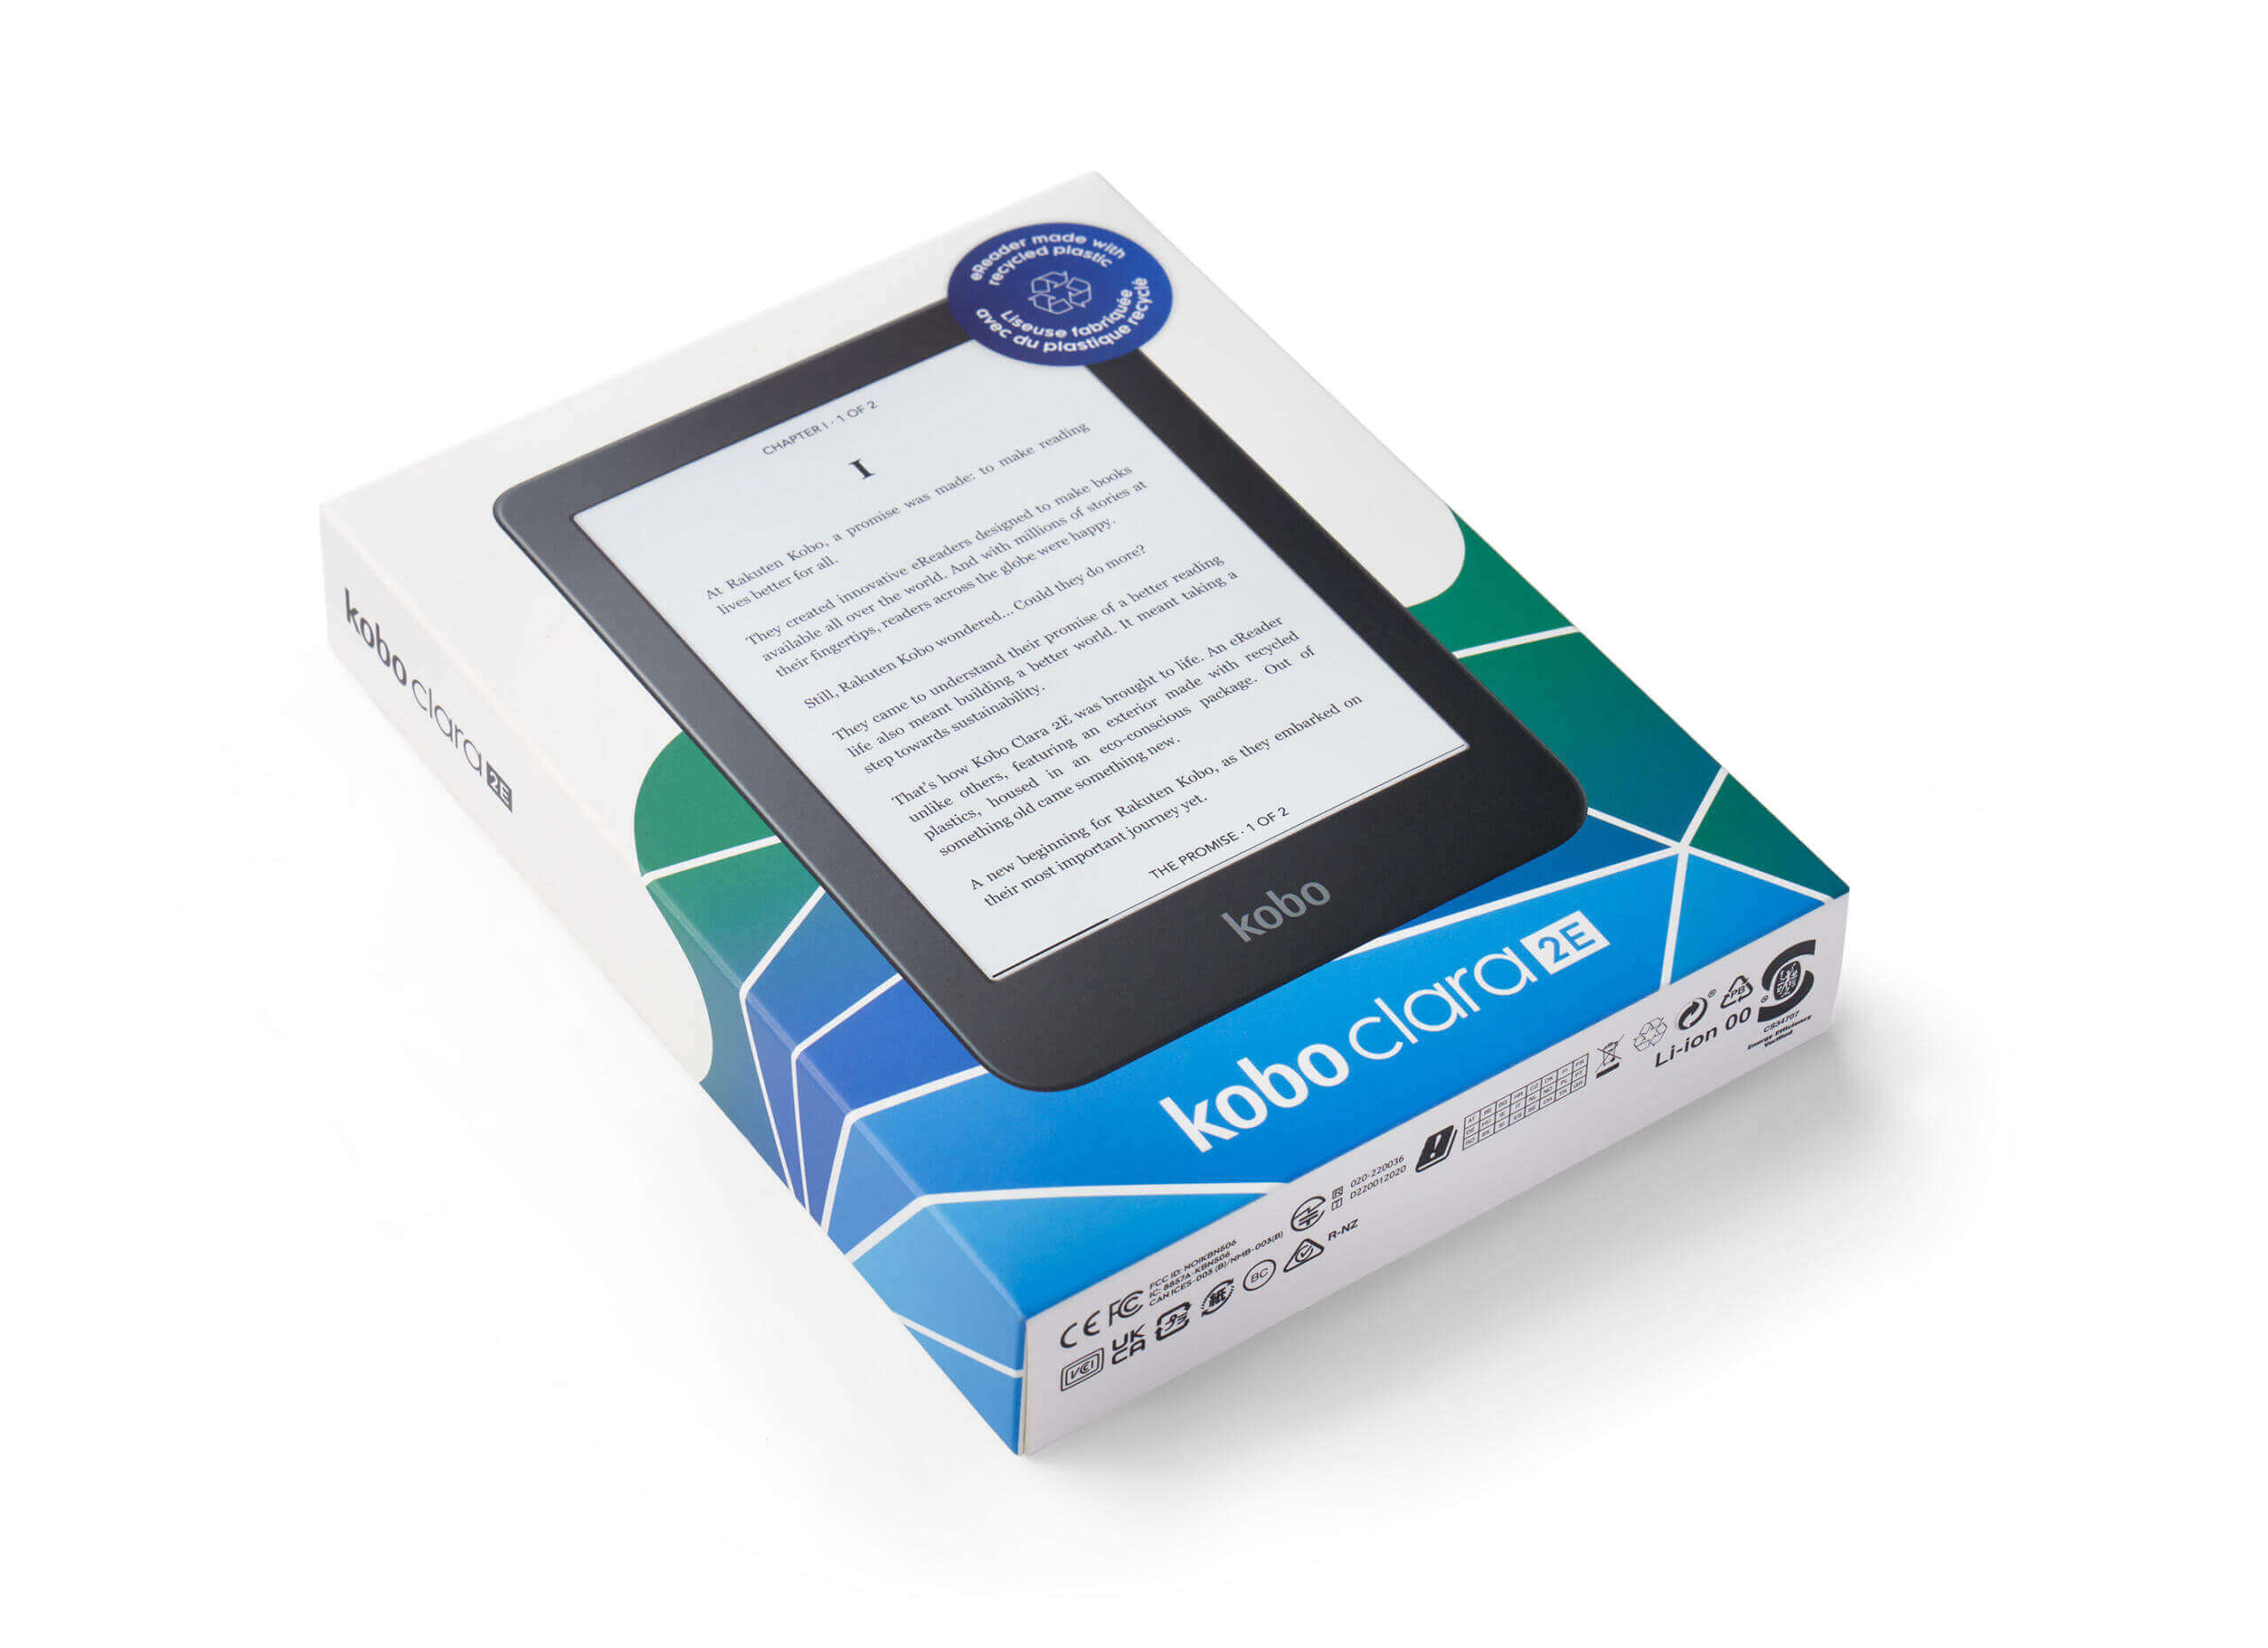 How Kobo's Clara 2E Could Make You Regret Your Kindle Paperwhite Purchase